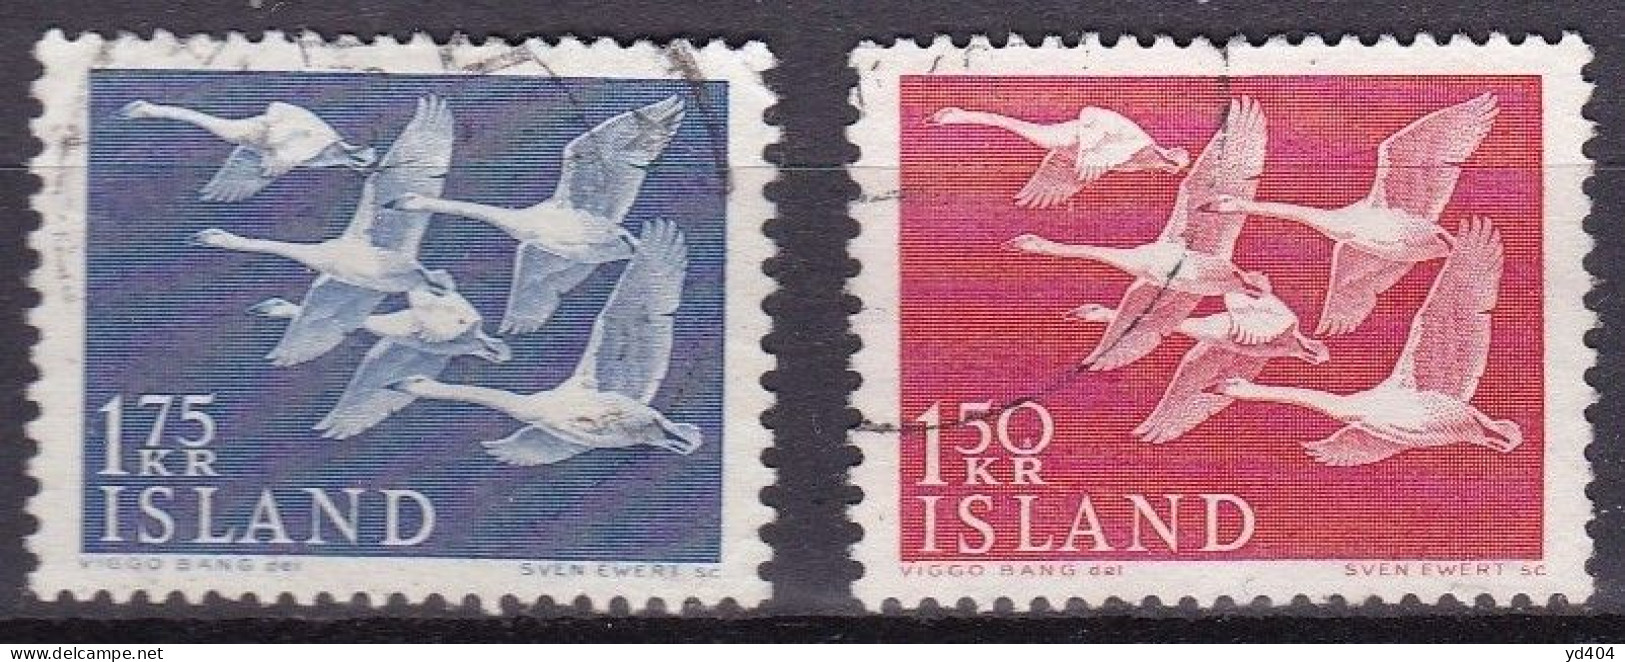 IS061 – ISLANDE – ICELAND – 1956 – NORTHEN COUNTRIES ISSUE – Y&T # 270/1 USED 15 € - Used Stamps